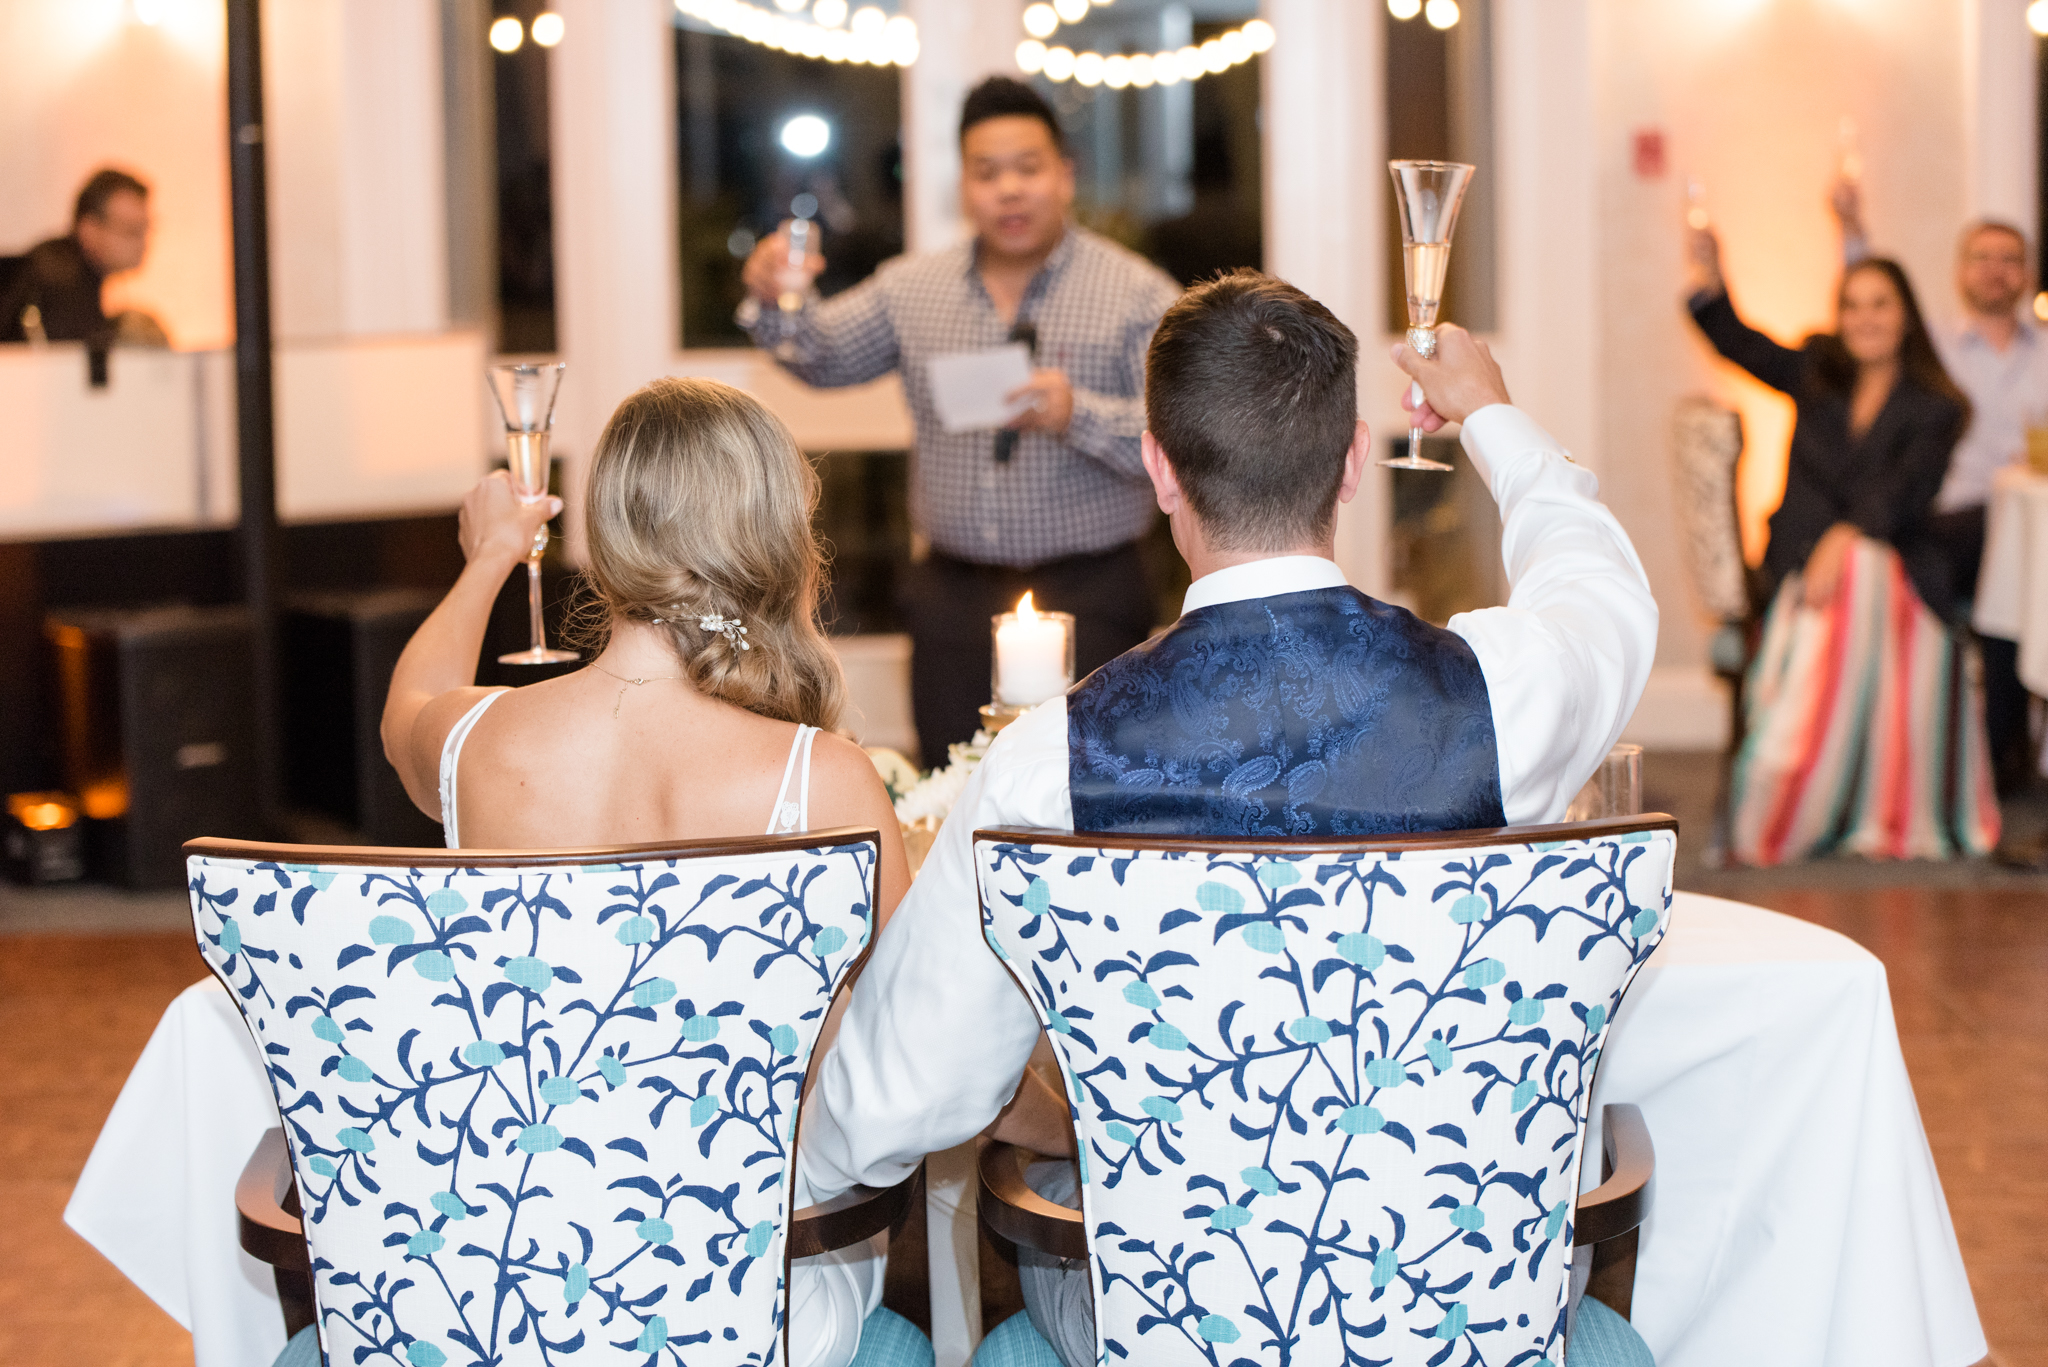 Bride and groom raise glasses during toast.